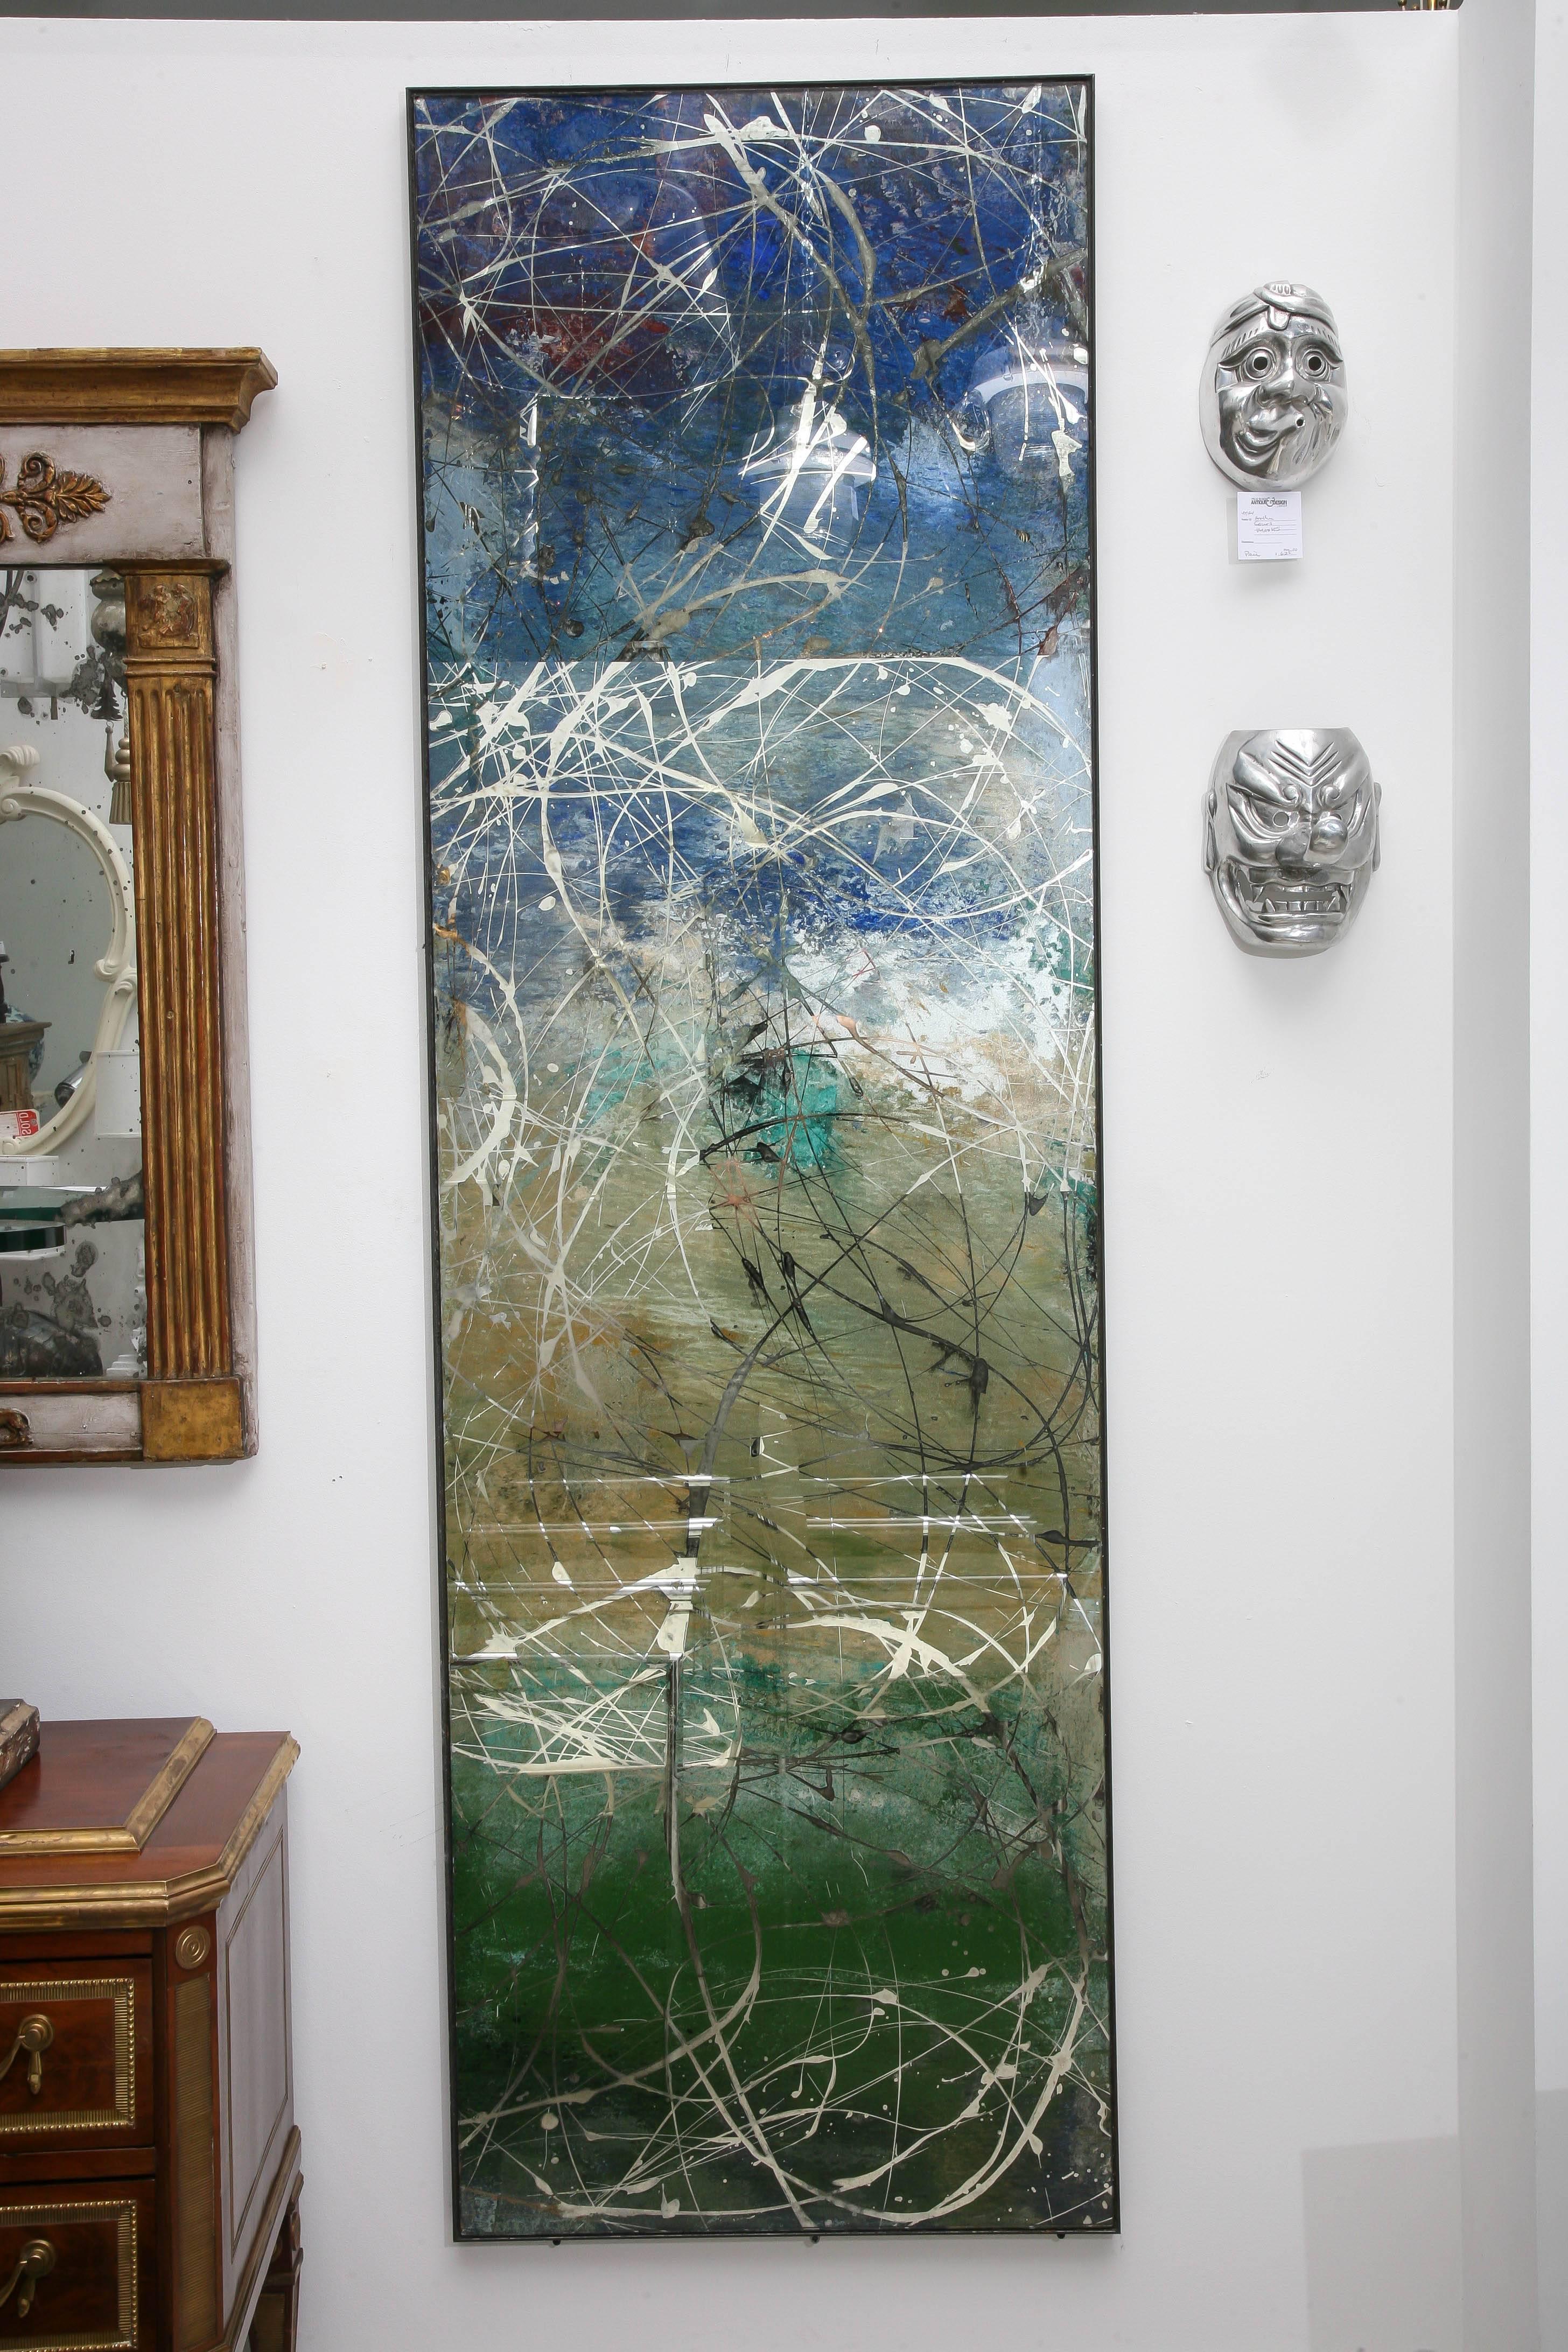 Pair of reverse painted rectangular mirrors with multicolored splatter pattern. The palette ranges from blue to green to yellow ochre.